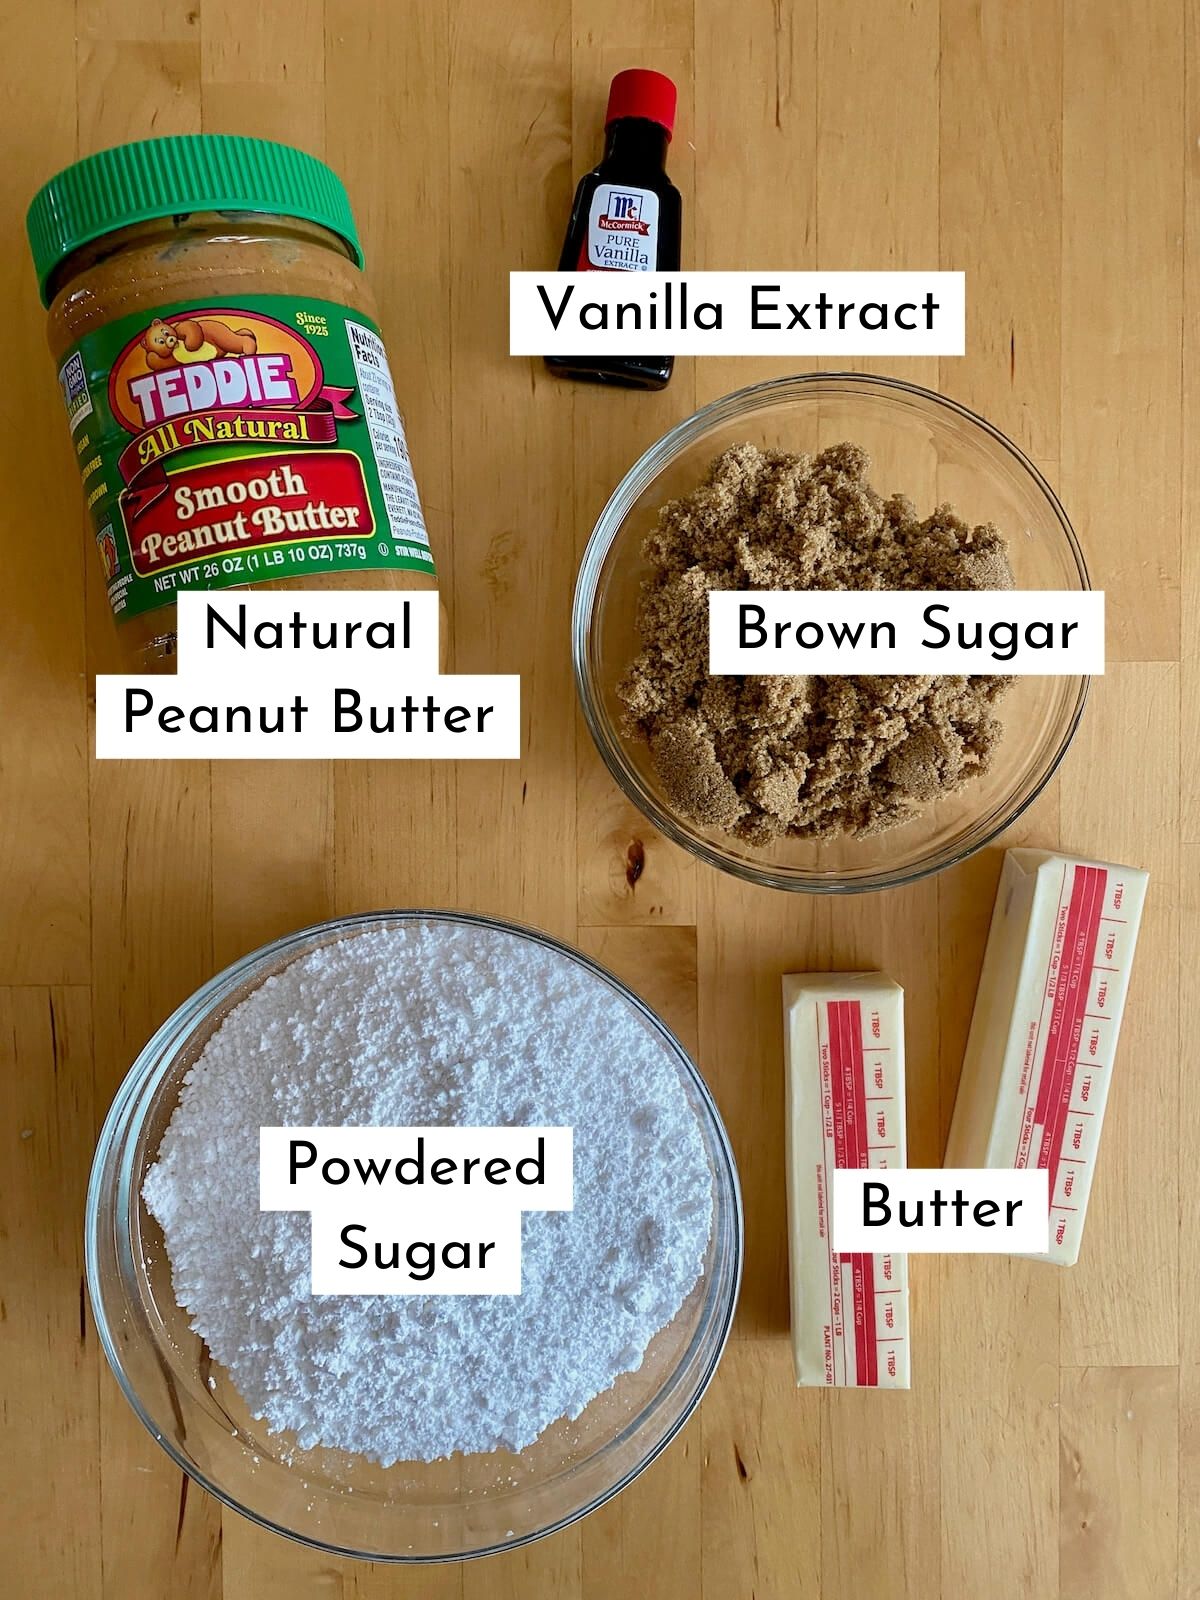 The ingredients to make no bake peanut butter fudge. Each ingredient is labeled with text stating what it is. They include natural peanut butter, vanilla extract brown sugar, powdered sugar, and butter.